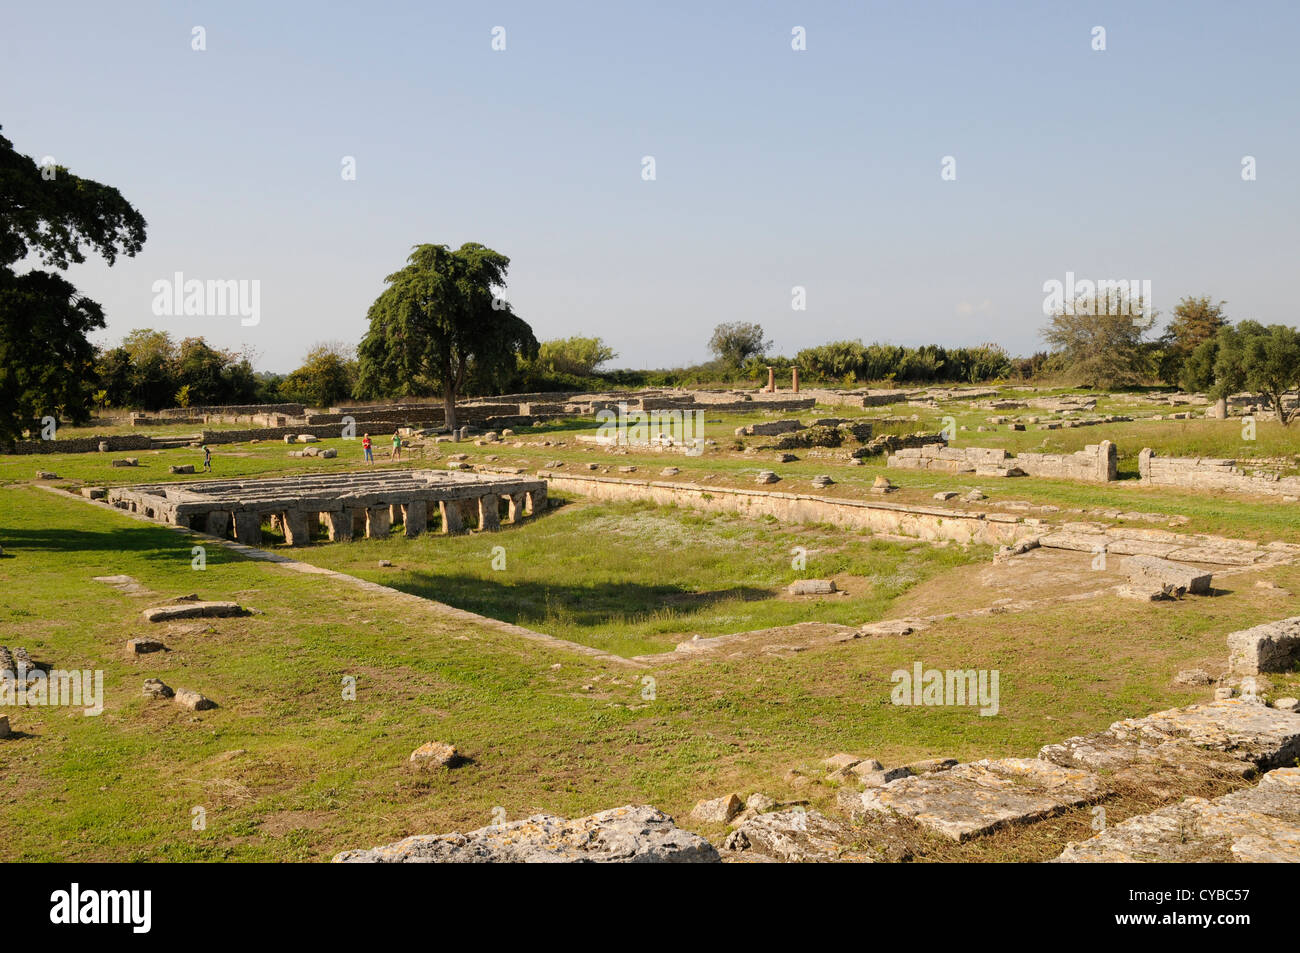 The Roman remains of the gymnasium and swimming pool of Paestum, south of Naples. Stock Photo